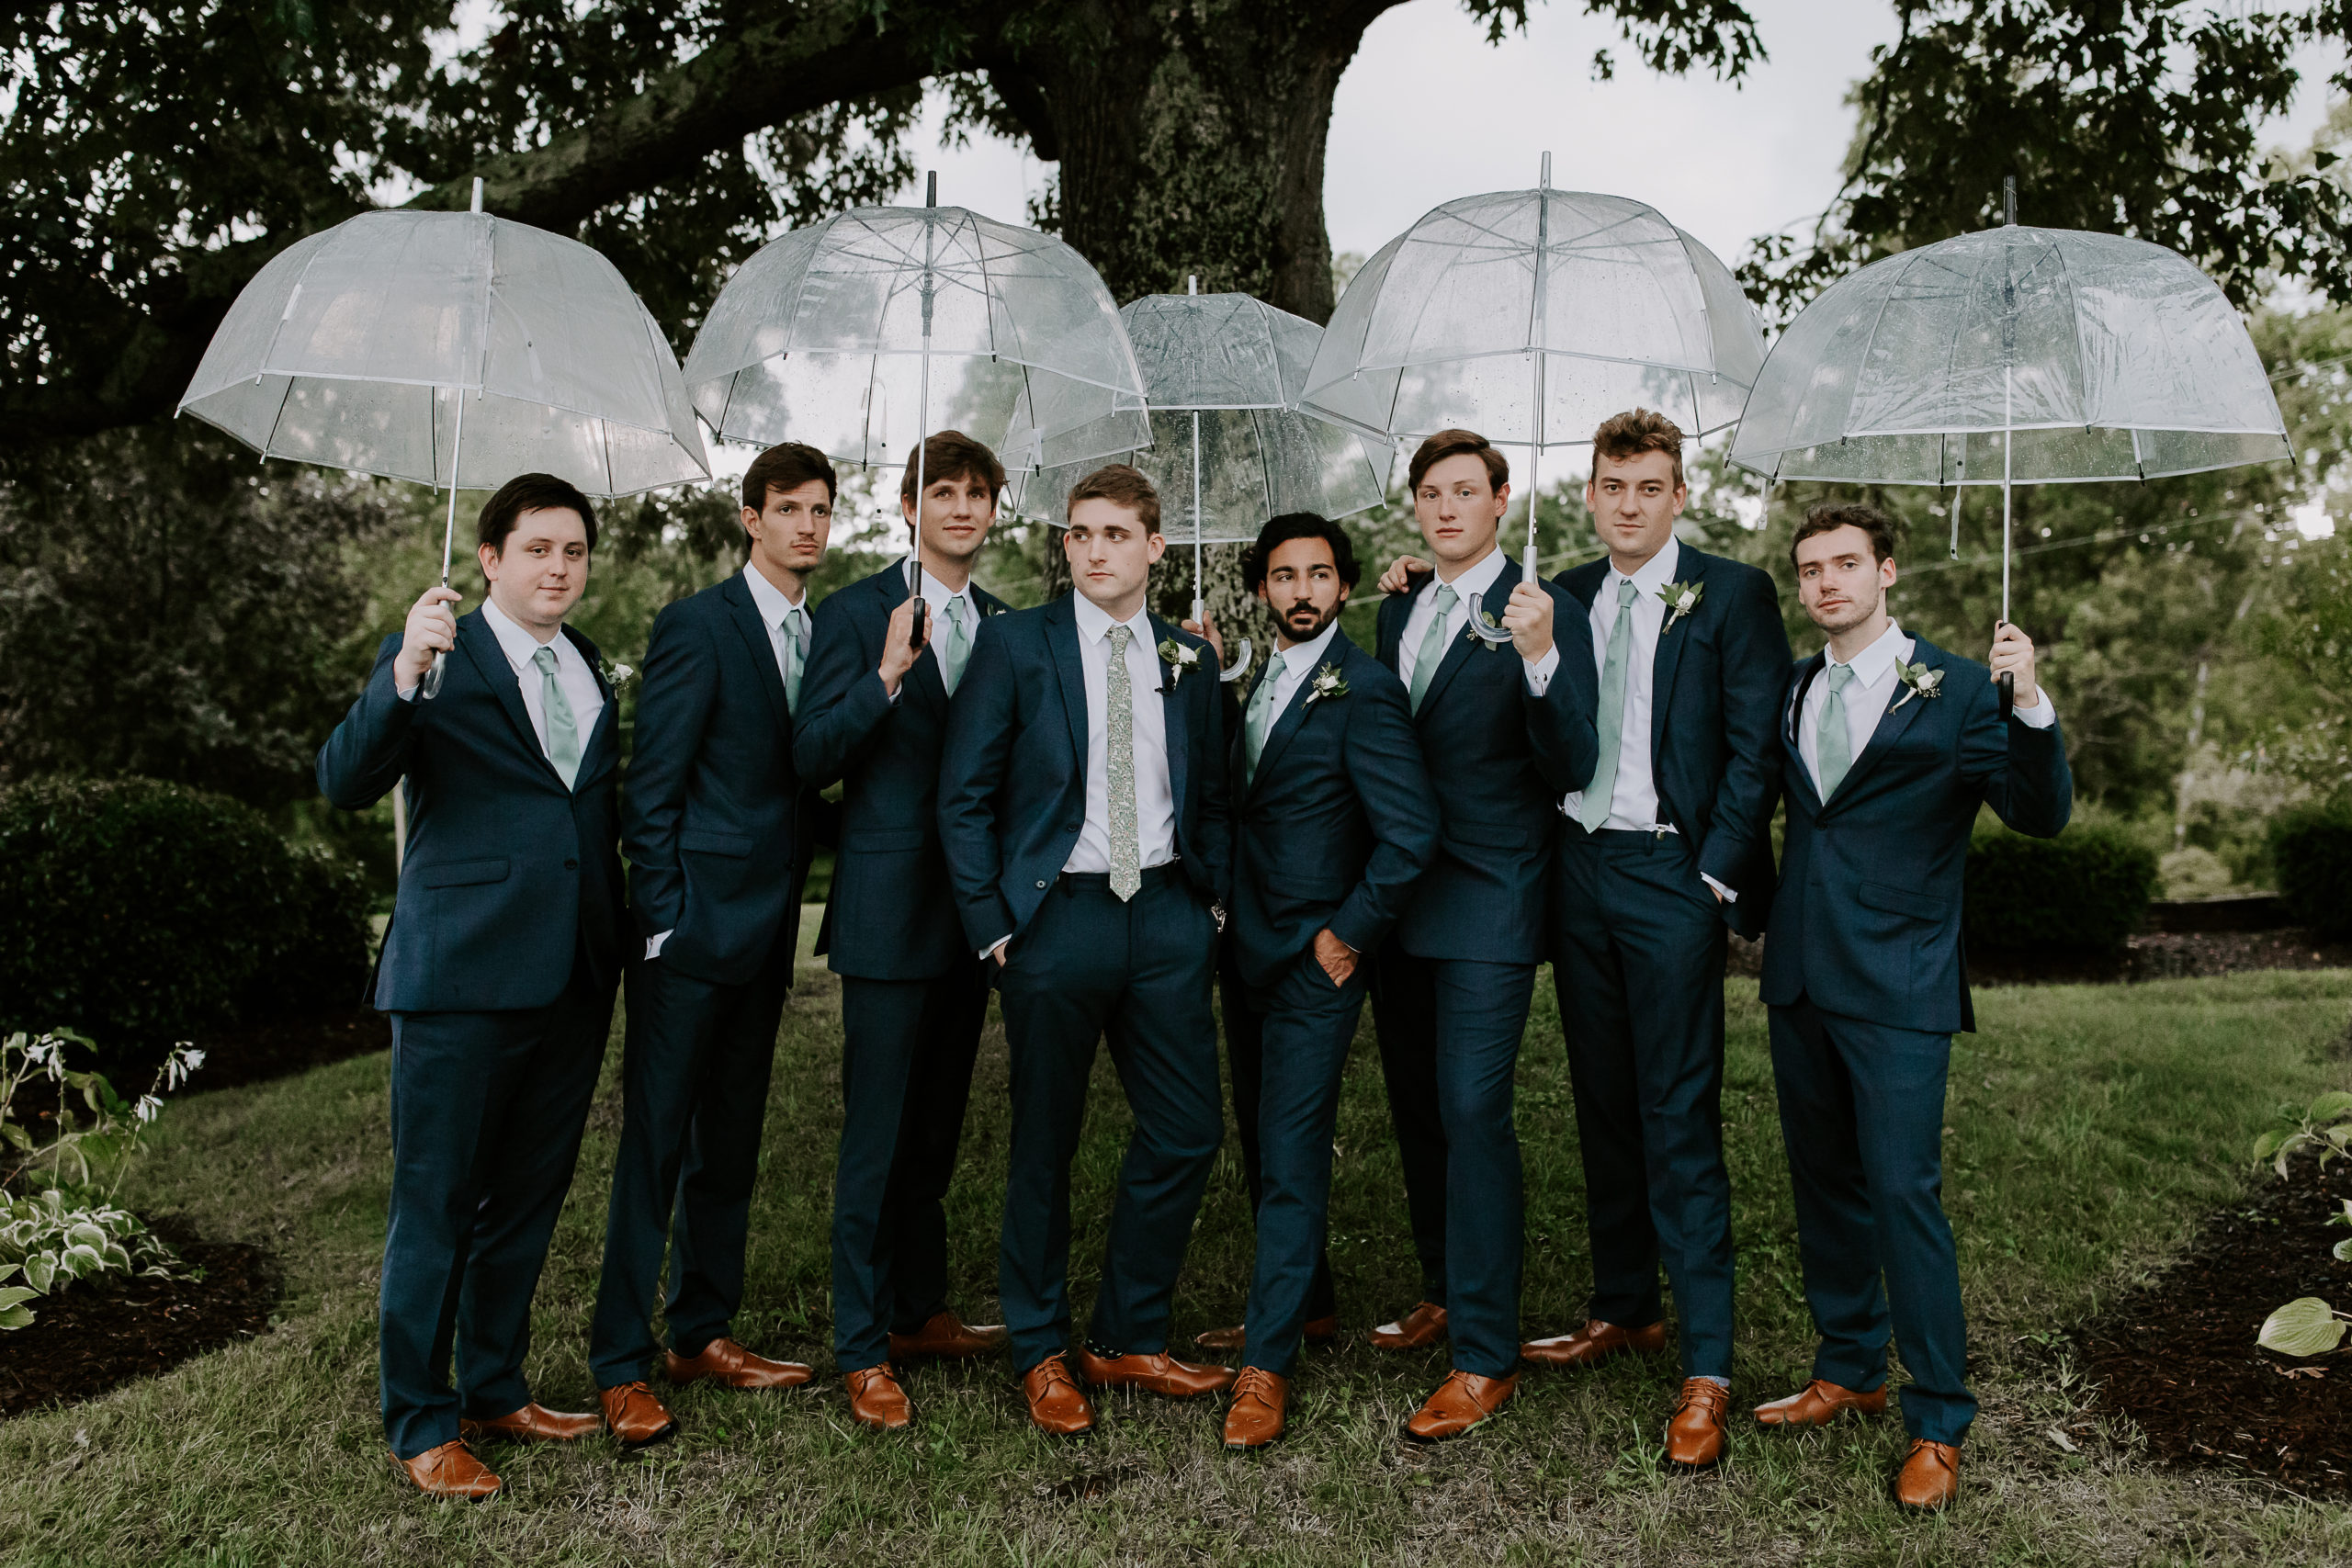 Groom and his groomsmen all in blue suits holding umbrellas and looking of fin to the distance during a rainy wedding in Tennessee